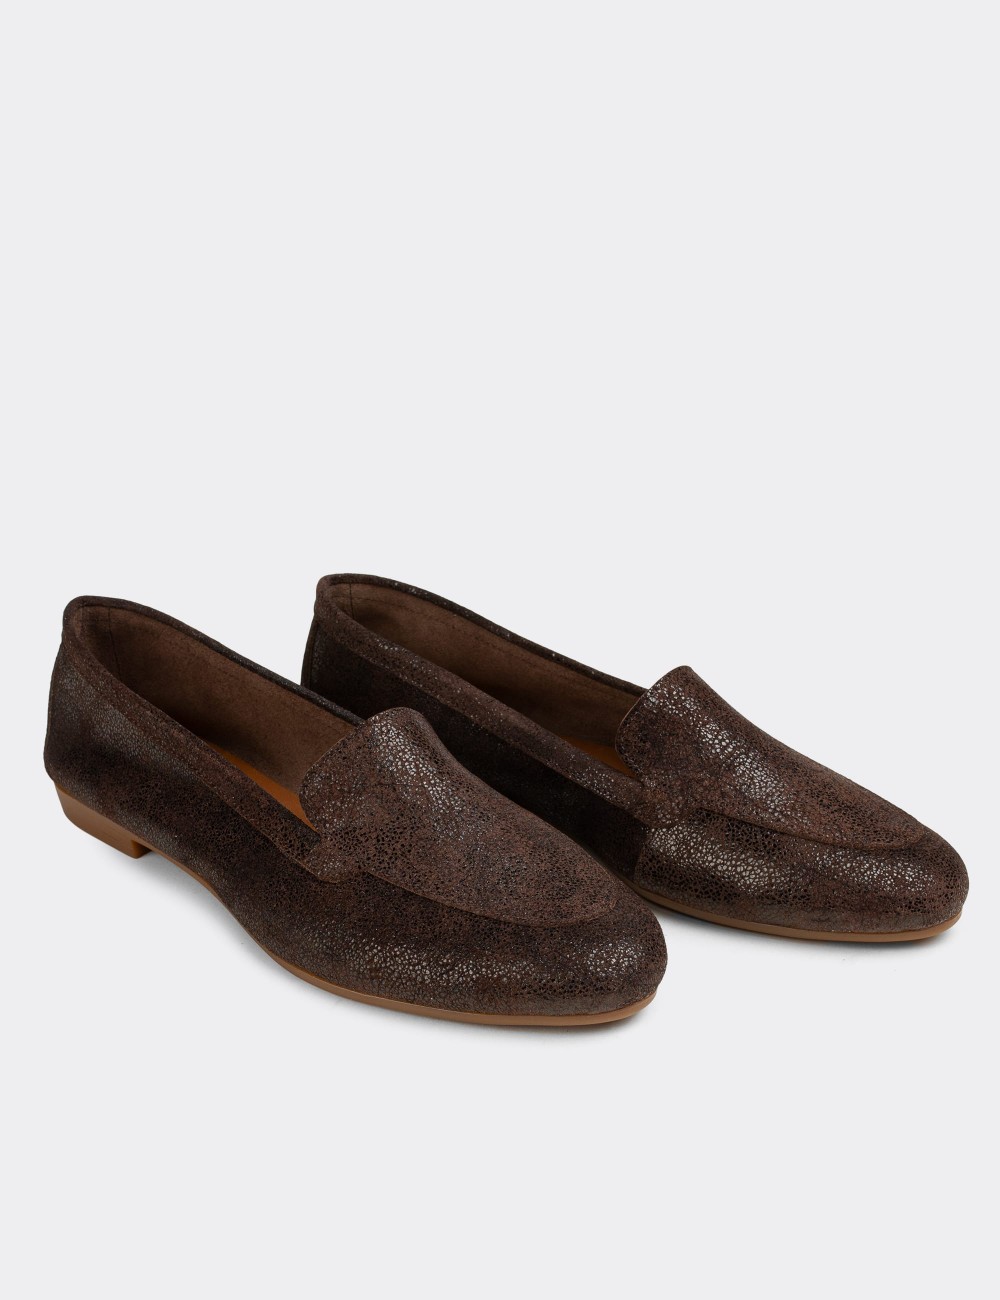 Tan Suede Leather Loafers  - E3206ZTBAC02